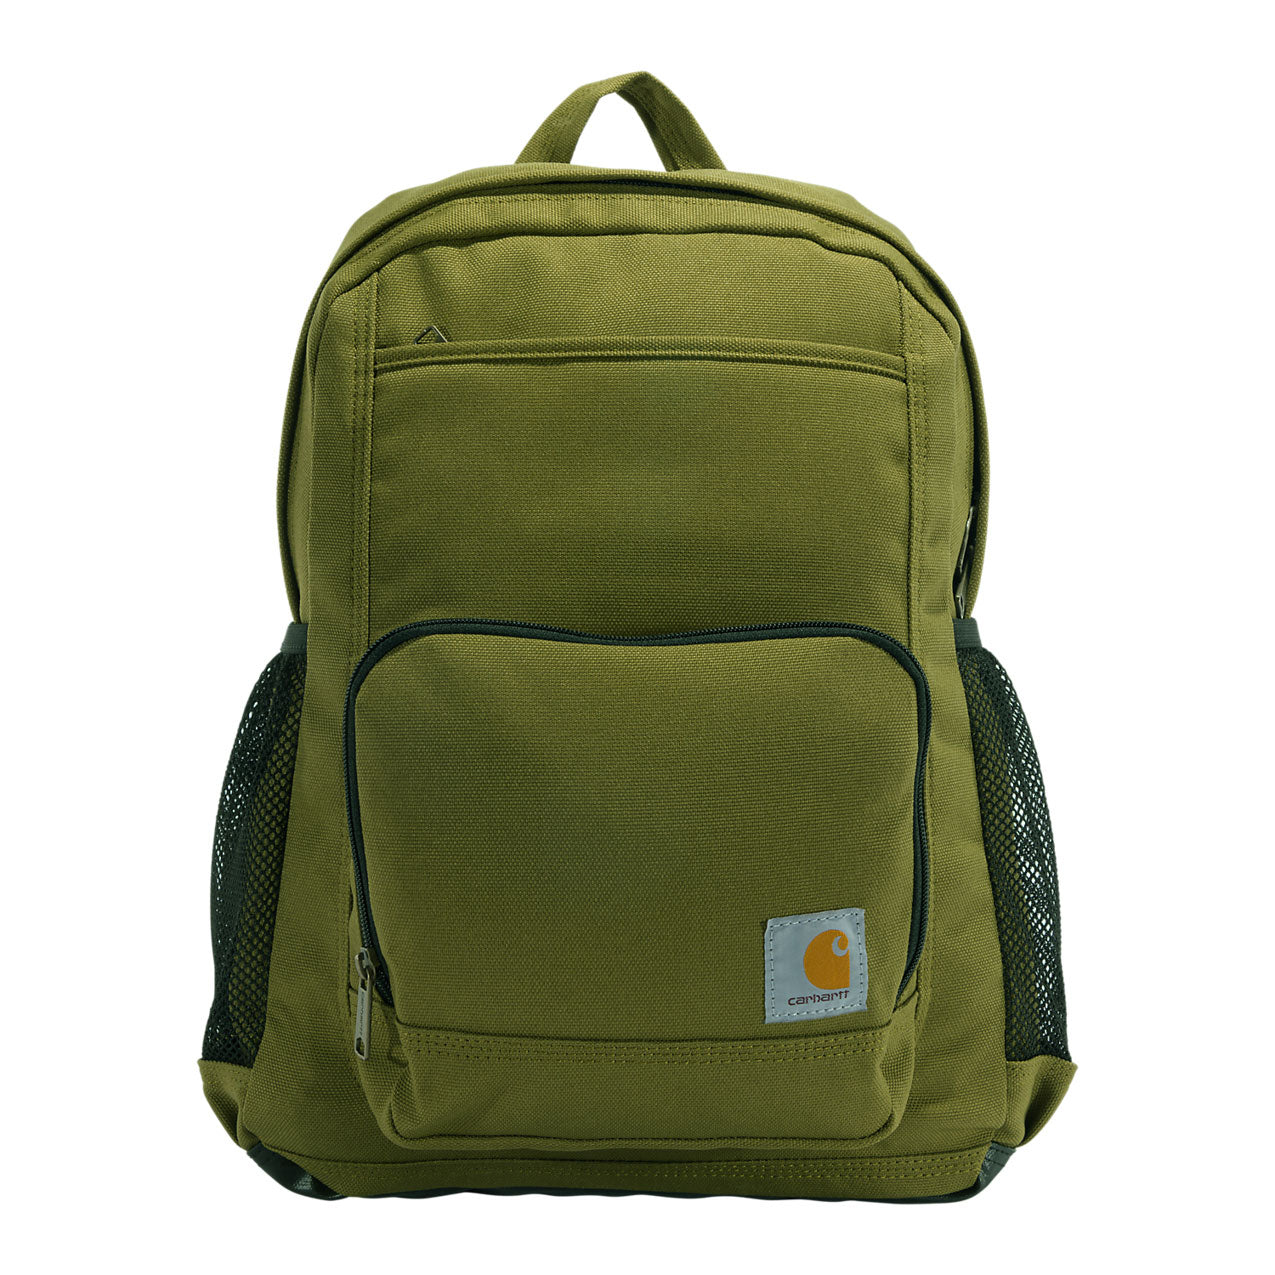 23L BACKPACK SINGLE COMPARTMENT Green